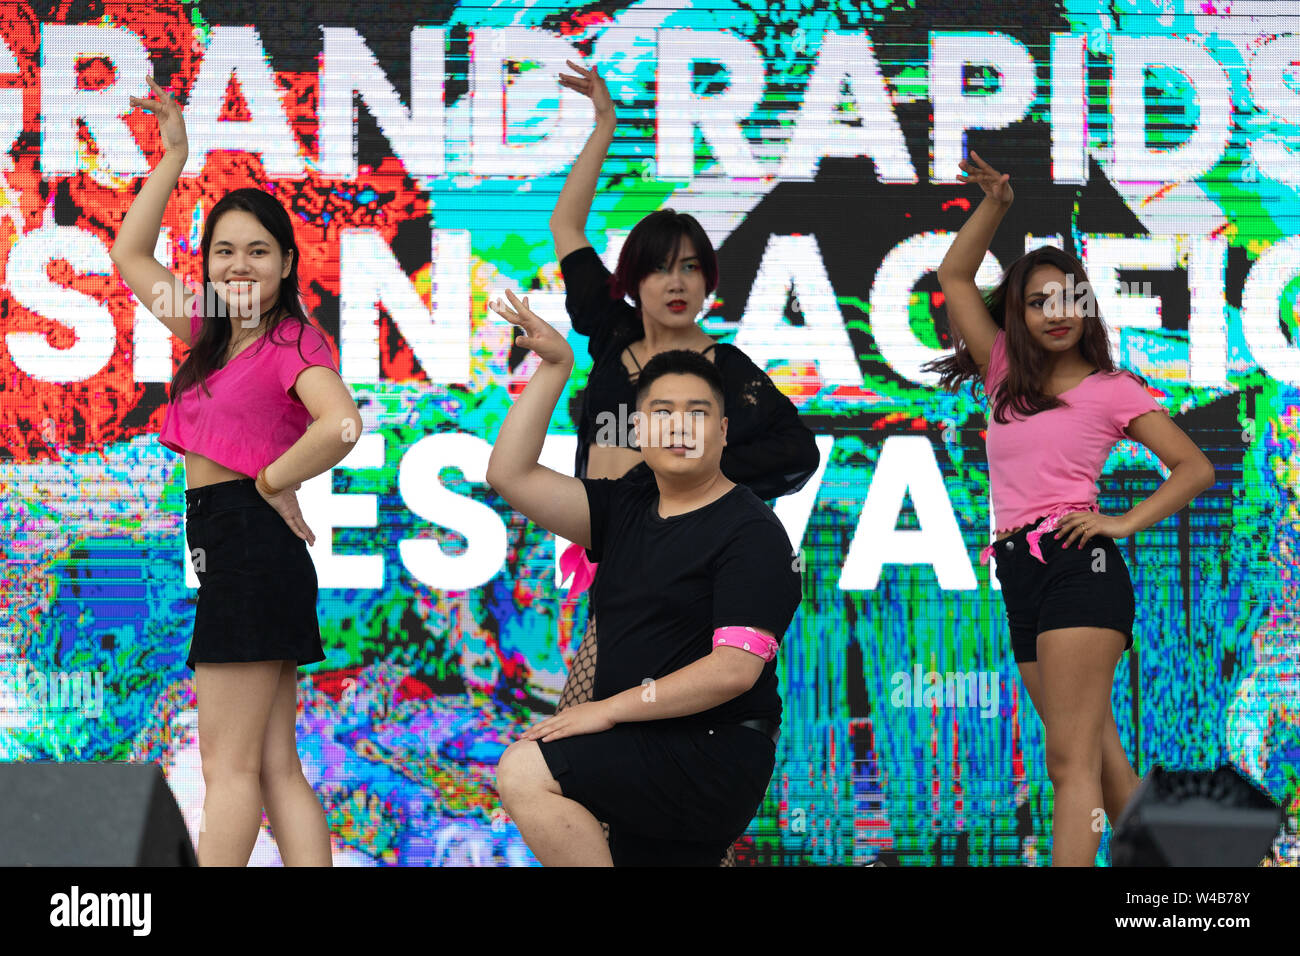 Grand Rapids, Michigan, USA - June 15, 2019: Asian Pacific Festival, Young asians dancing Hip Hop during the festival at the Rosa Parks Stock Photo